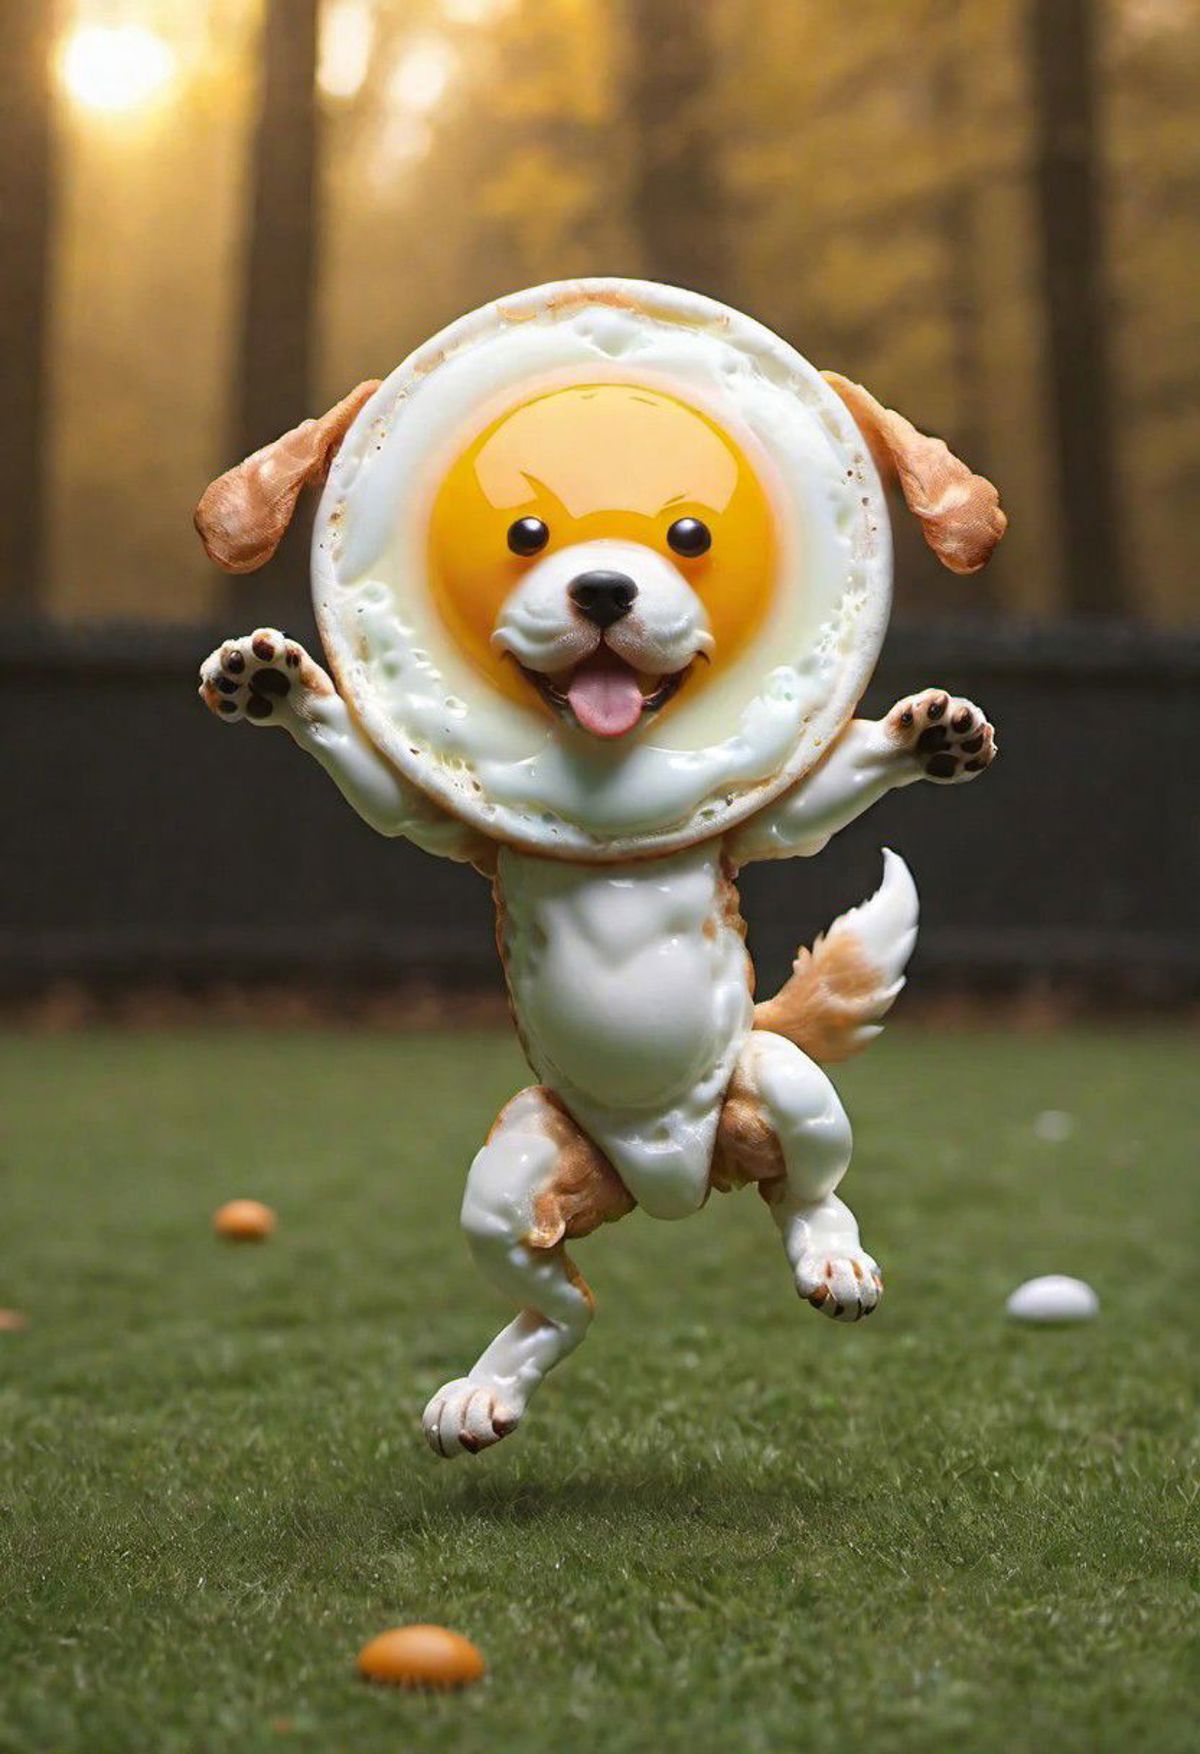 A small brown and white dog wearing a fried egg on its head, standing on a green grassy field.